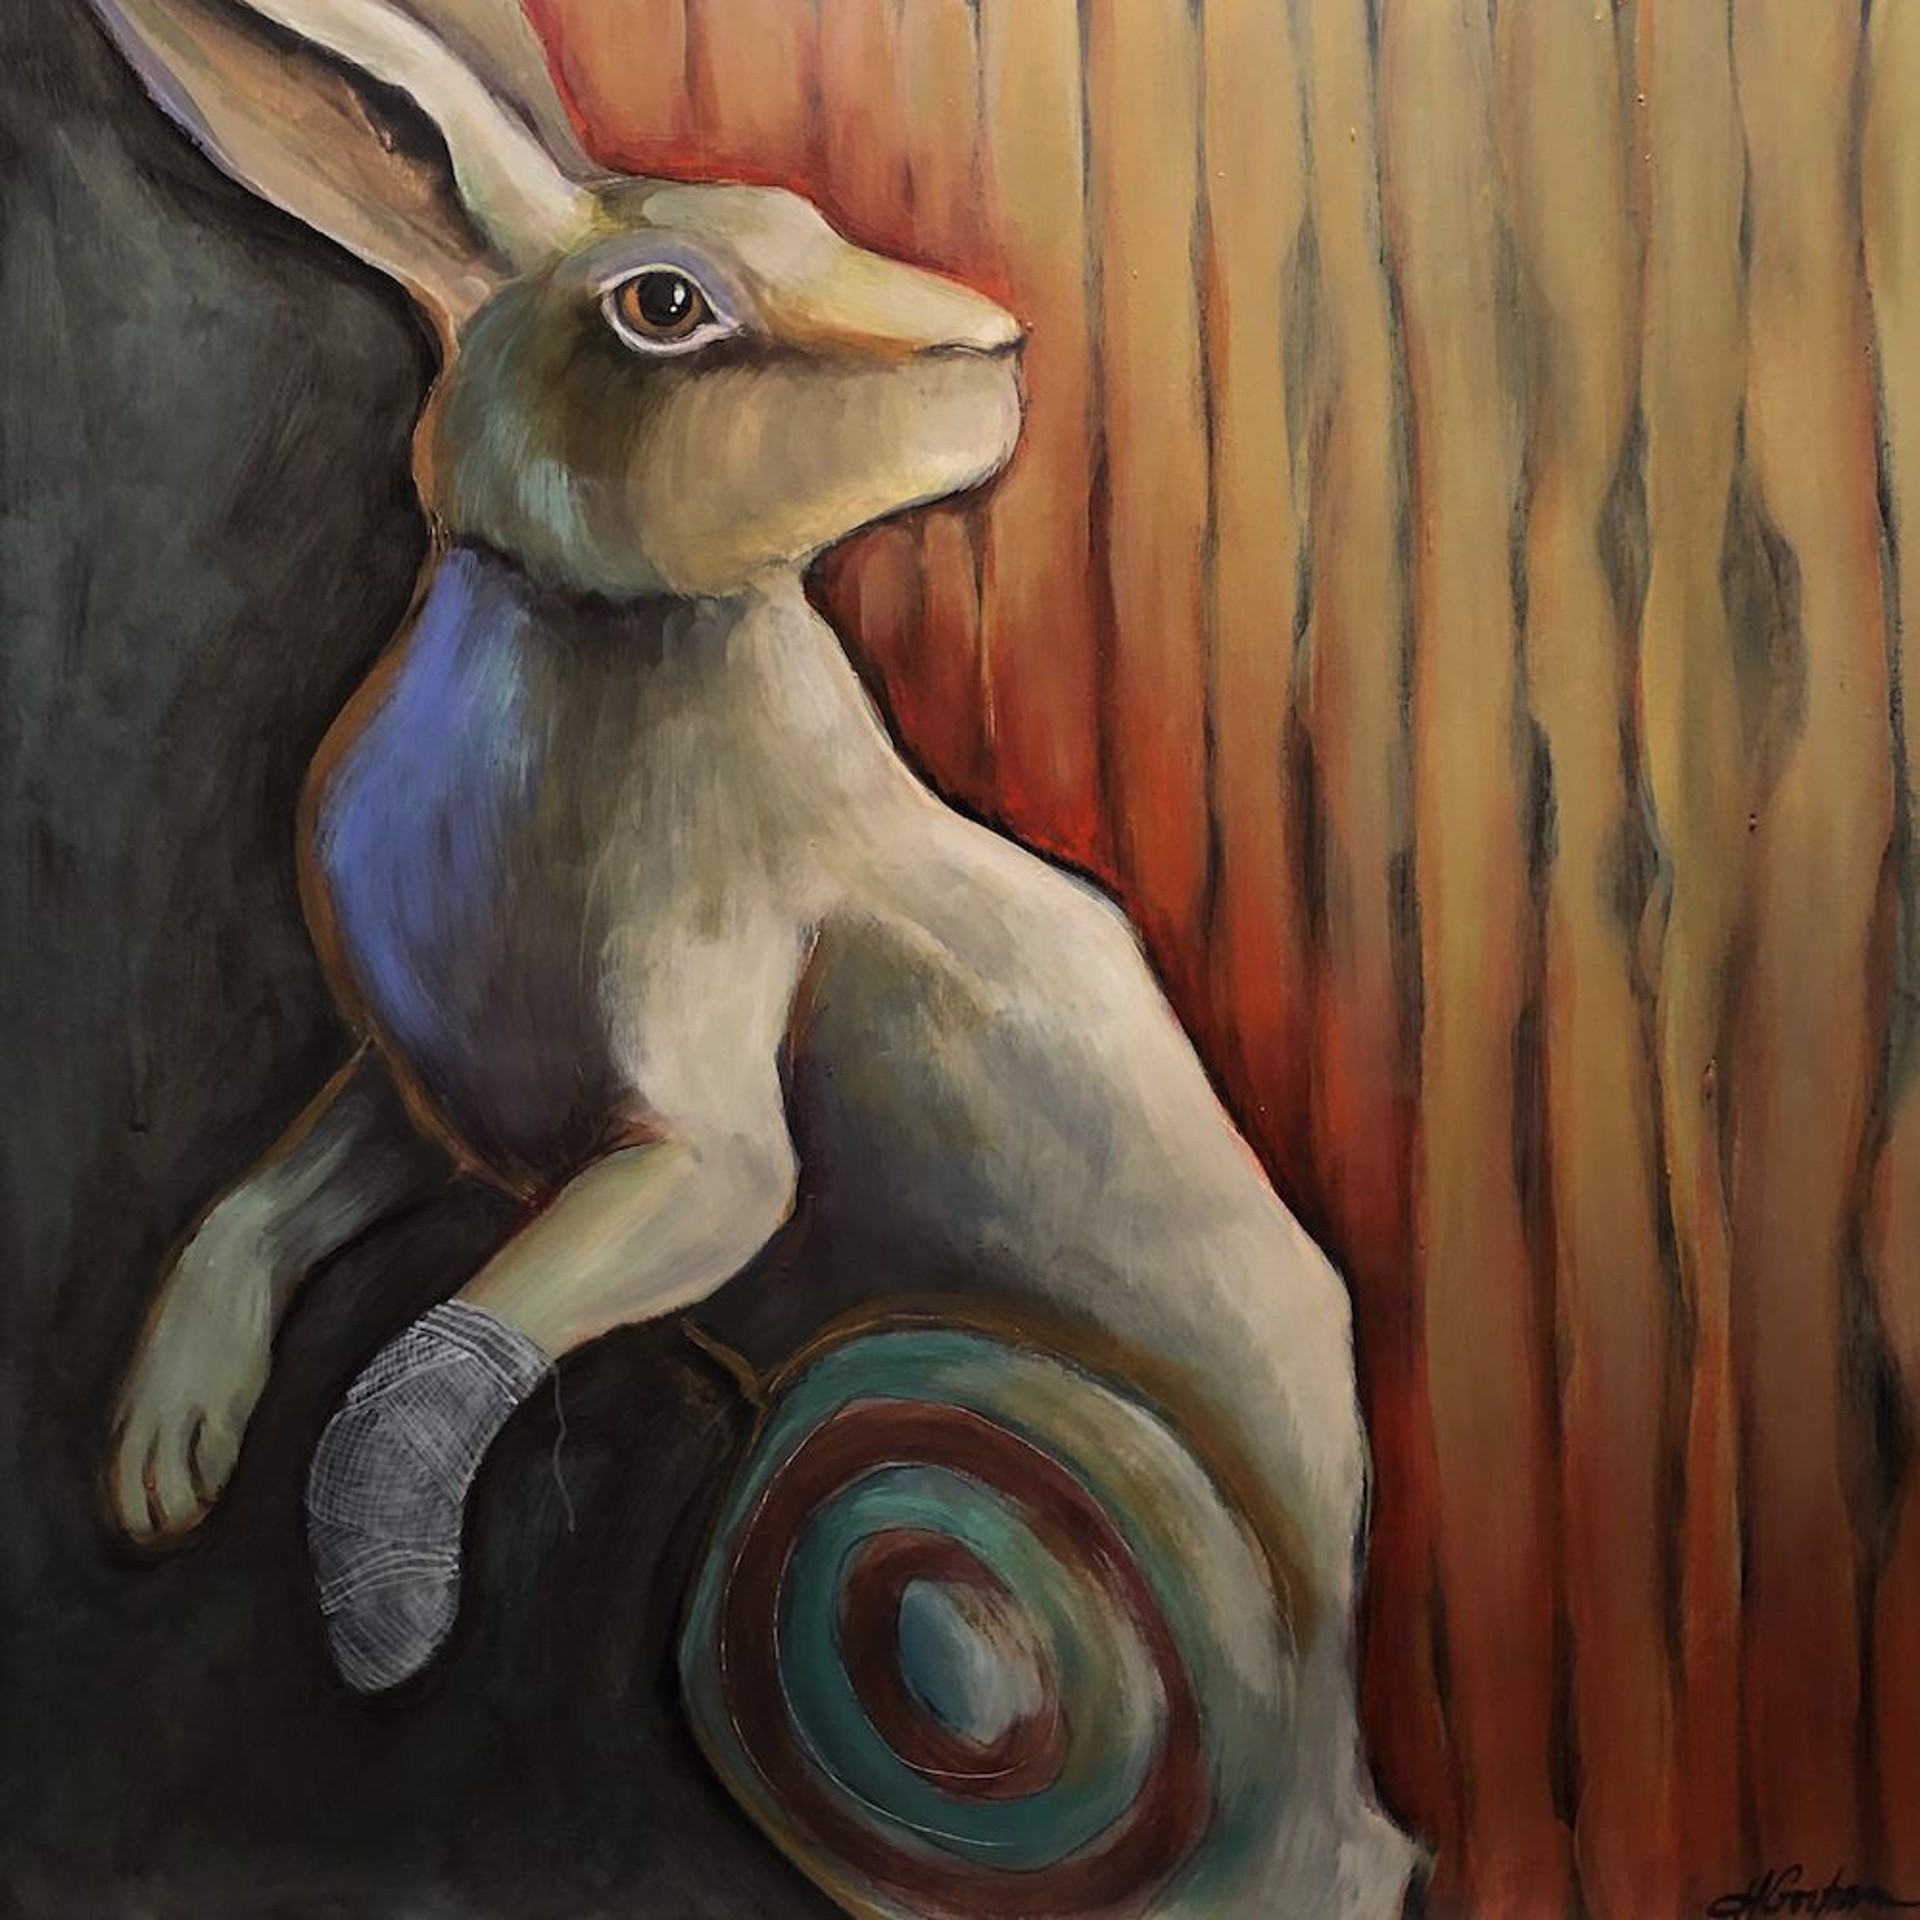 No Luck For the Rabit by Heather Gorham